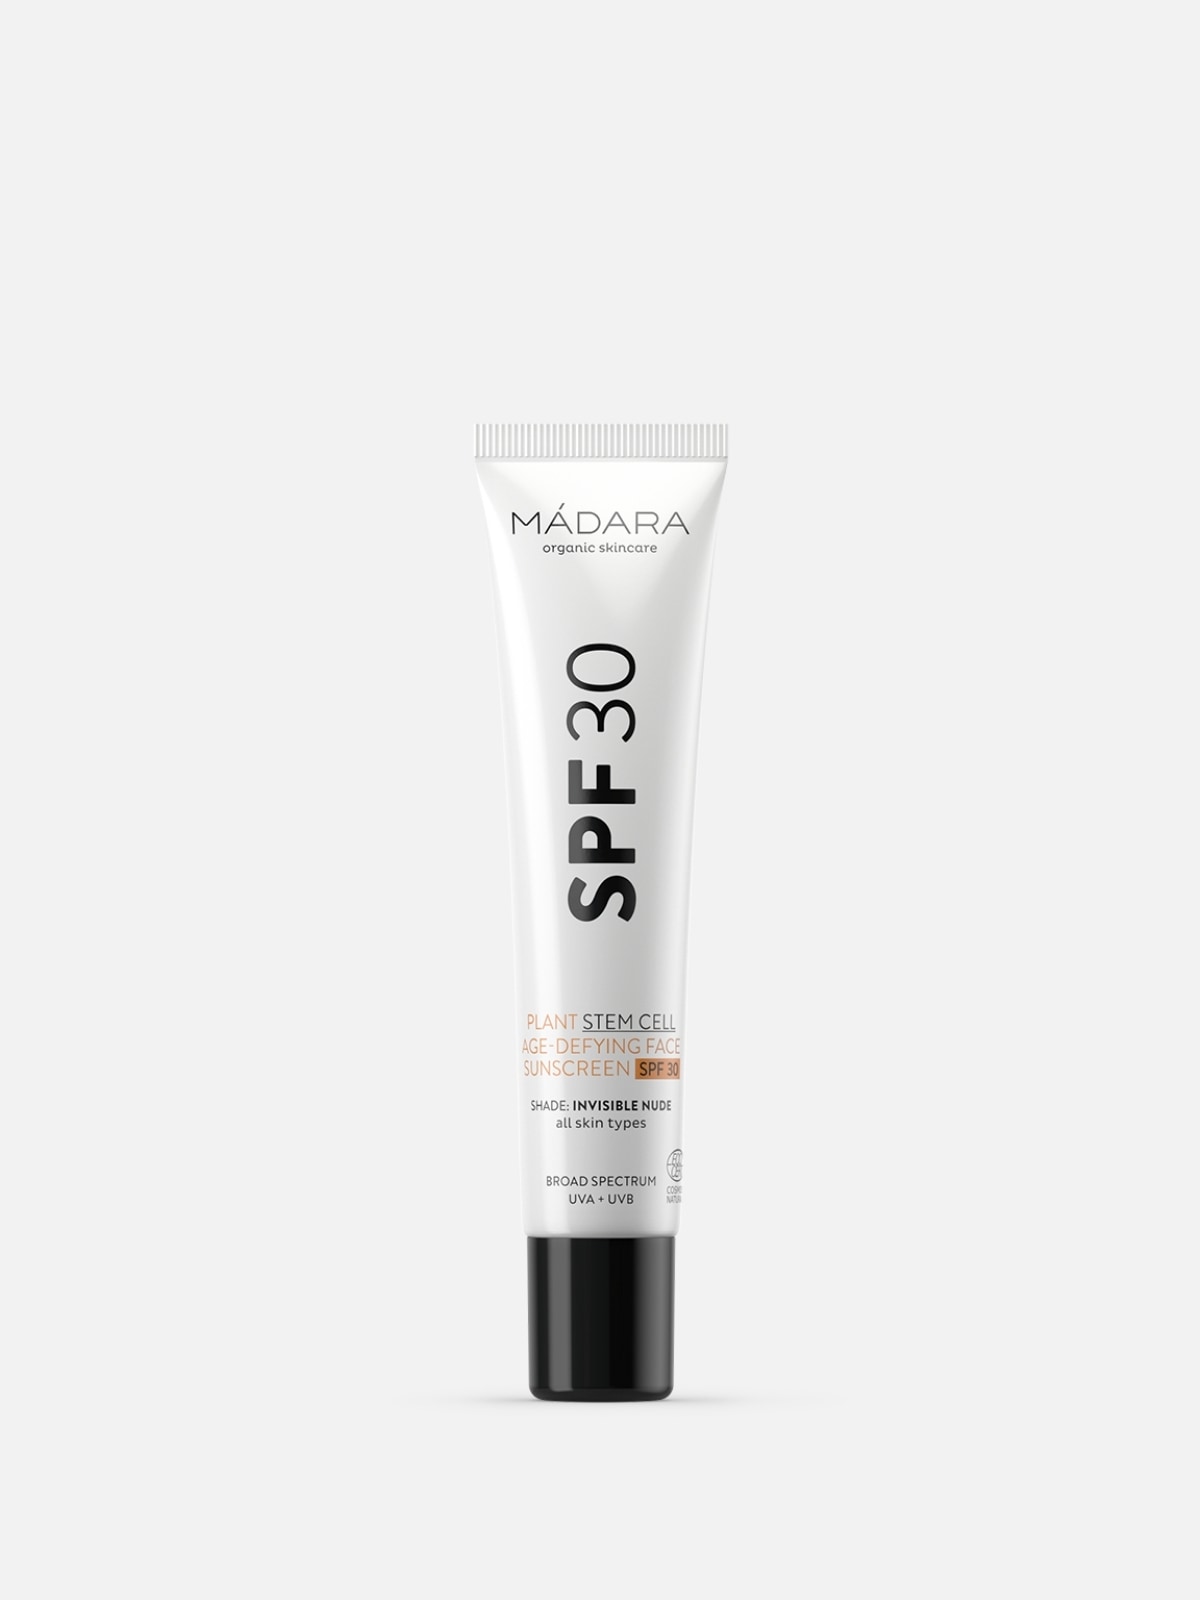 - Plant Stem Cell Age-Defying Face Sunscreen SPF30 -